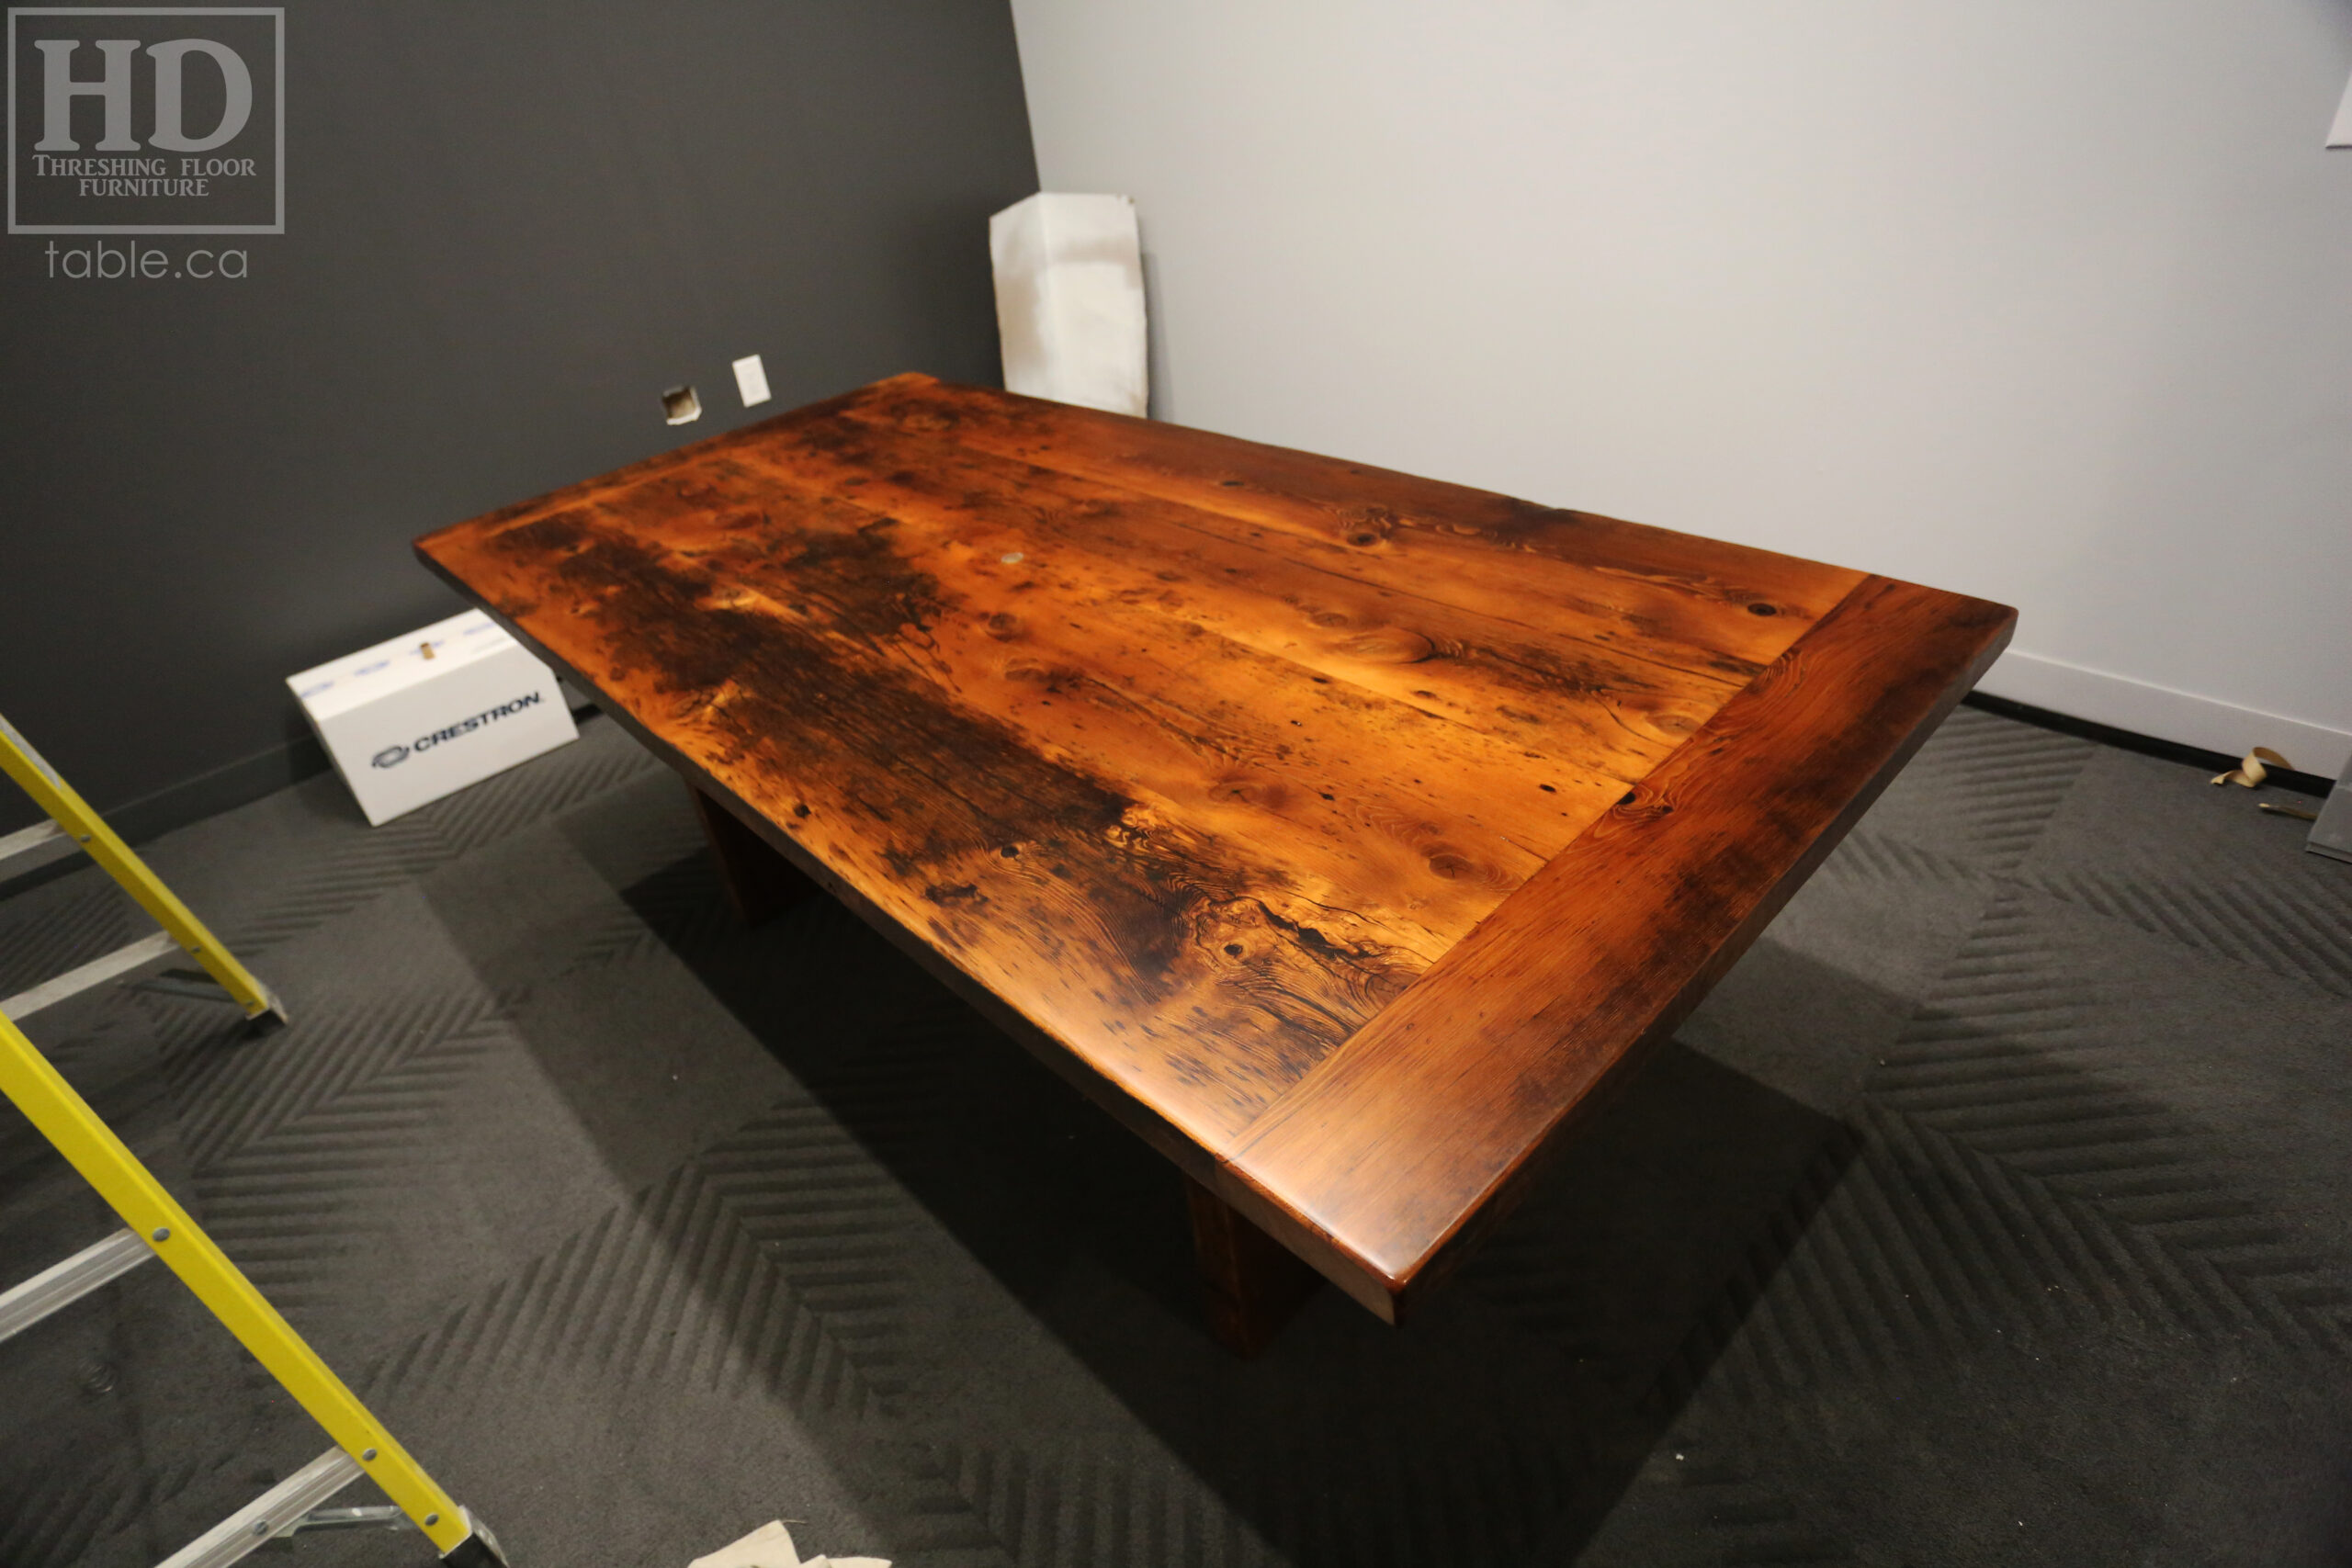 Reclaimed Wood Boardroom Table with Modern Plank Base by HD Threshing Floor Furniture / www.table.ca